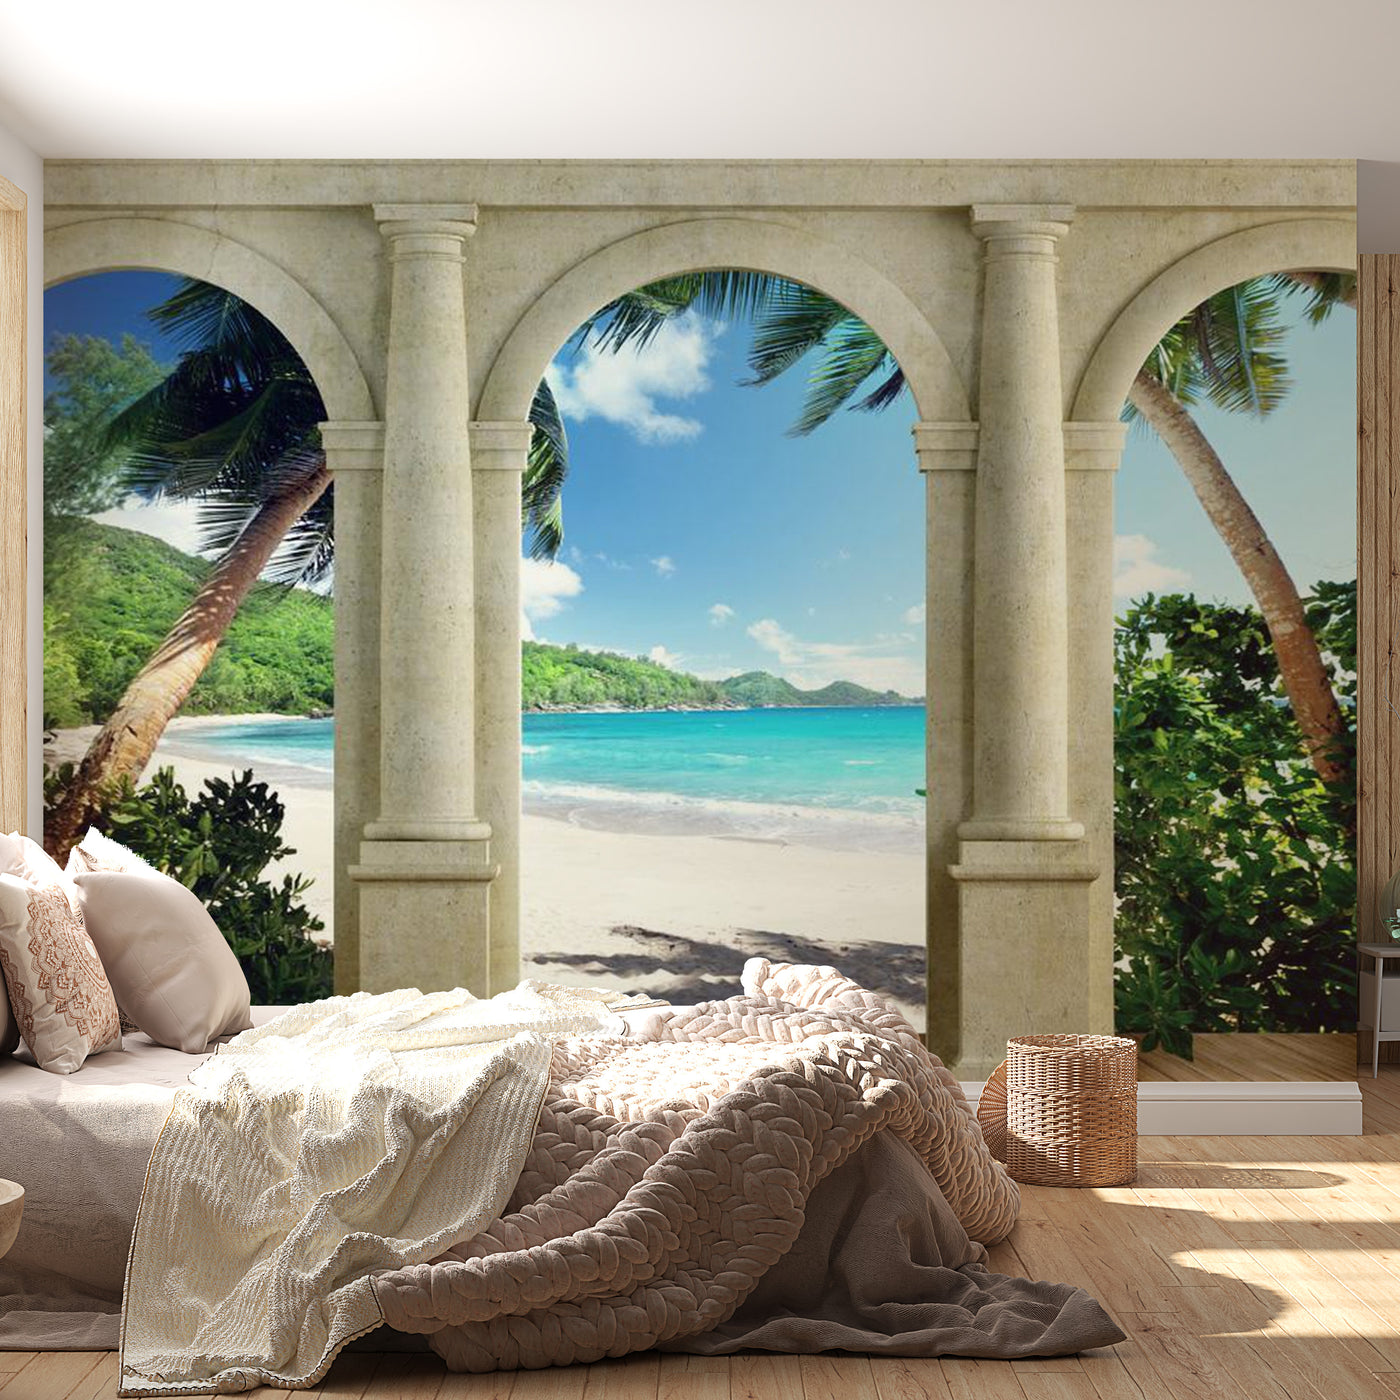 Peel & Stick Beach Wall Mural - Sunny Morning - Removable Wall Decals